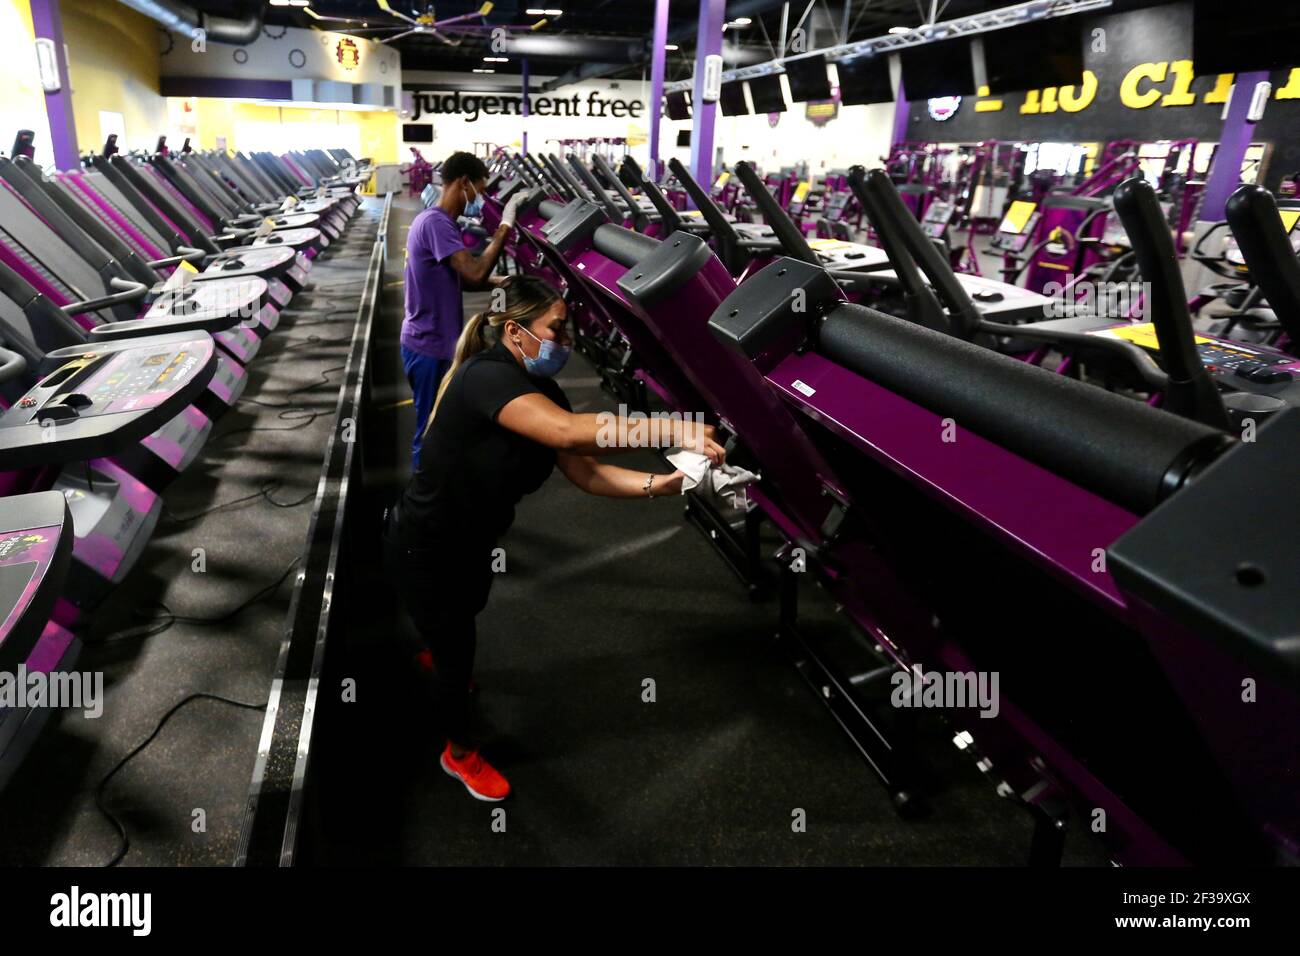 https://c8.alamy.com/comp/2F39XGX/los-angeles-usa-16th-mar-2021-staff-members-of-planet-fitness-prepare-for-reopening-to-the-public-in-inglewood-los-angeles-county-california-the-united-states-march-15-2021-gyms-restaurants-movie-theaters-and-museums-in-los-angeles-county-are-allowed-to-resume-limited-indoor-operations-on-monday-after-the-most-populous-county-in-the-country-loosened-restrictions-against-covid-19-credit-xinhuaalamy-live-news-2F39XGX.jpg